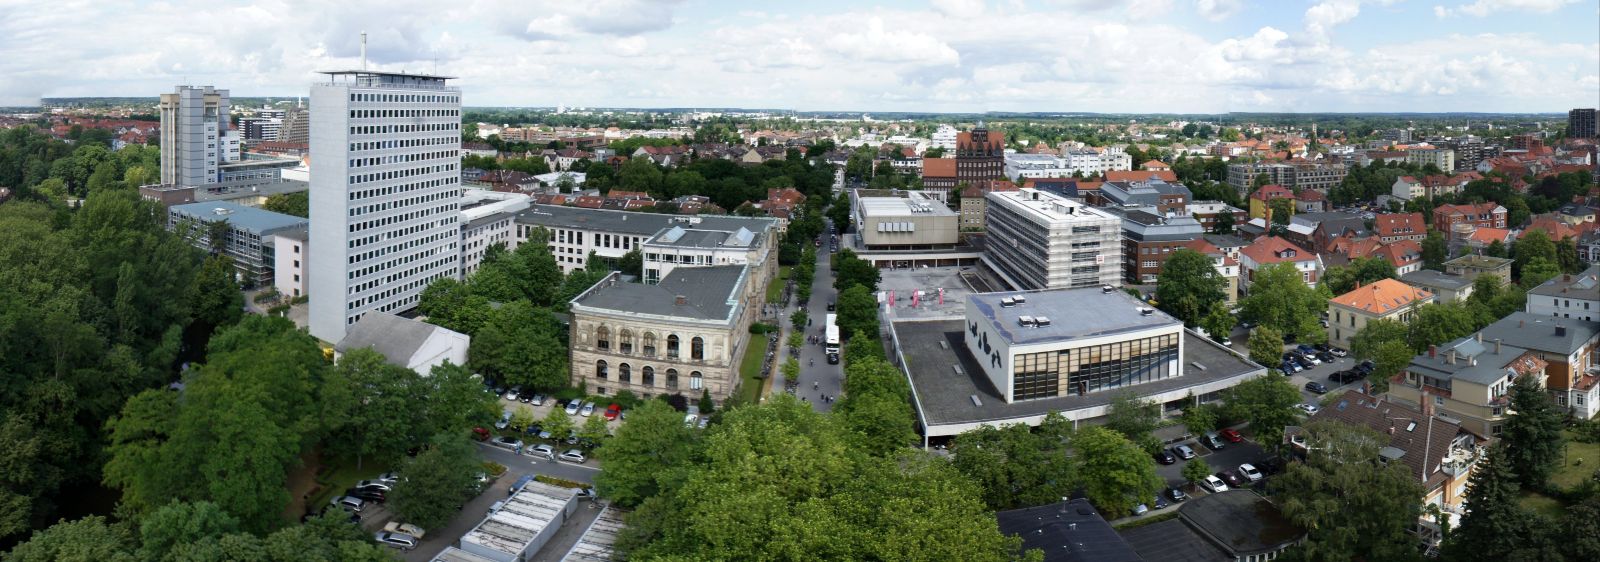 Aerial view of the central campus of the TU Braunschweig